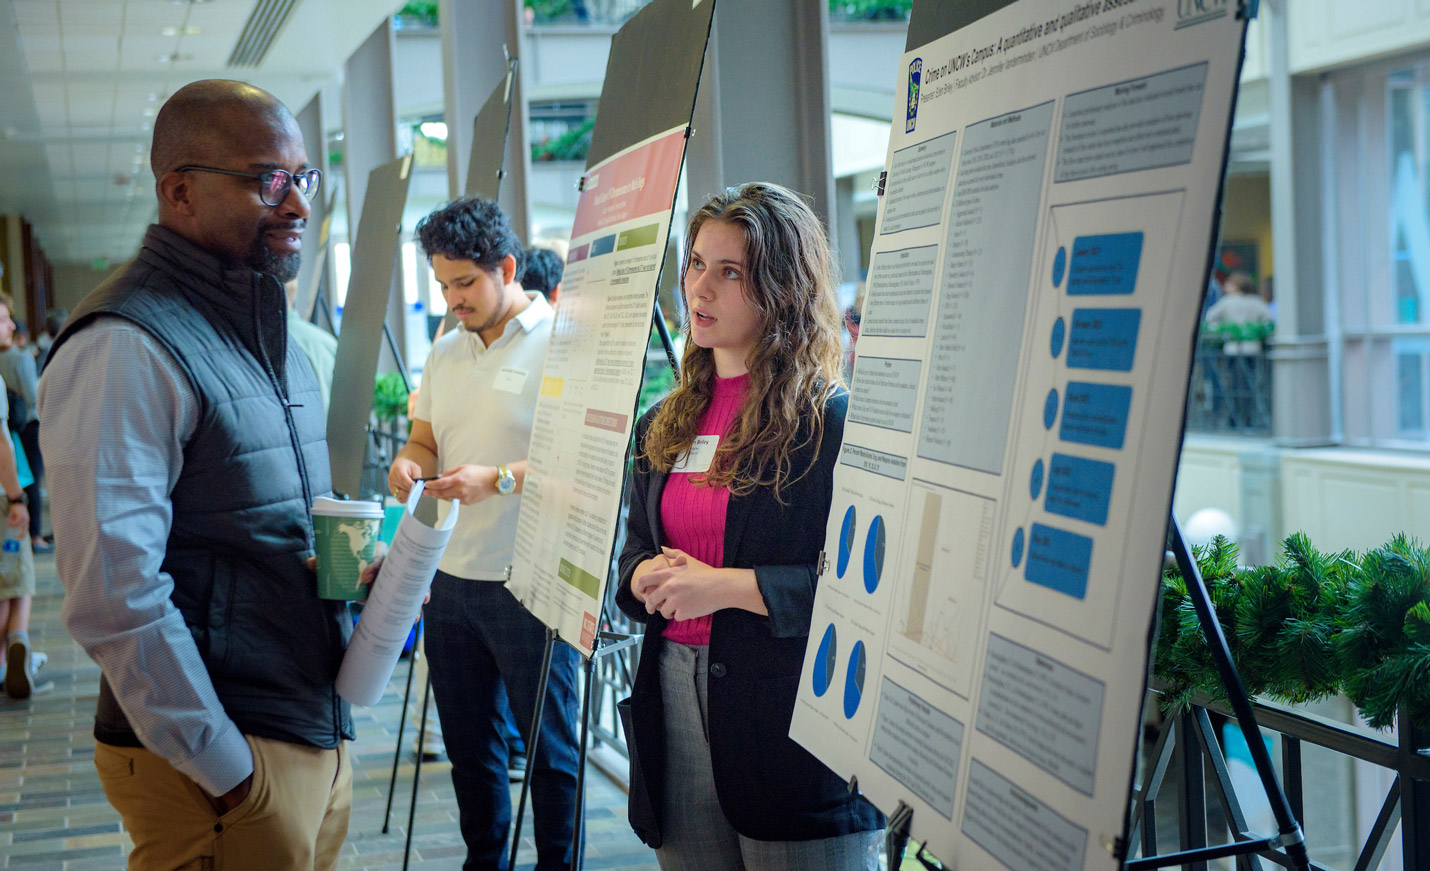 A student explains her research poster to a man attending a student research showcase